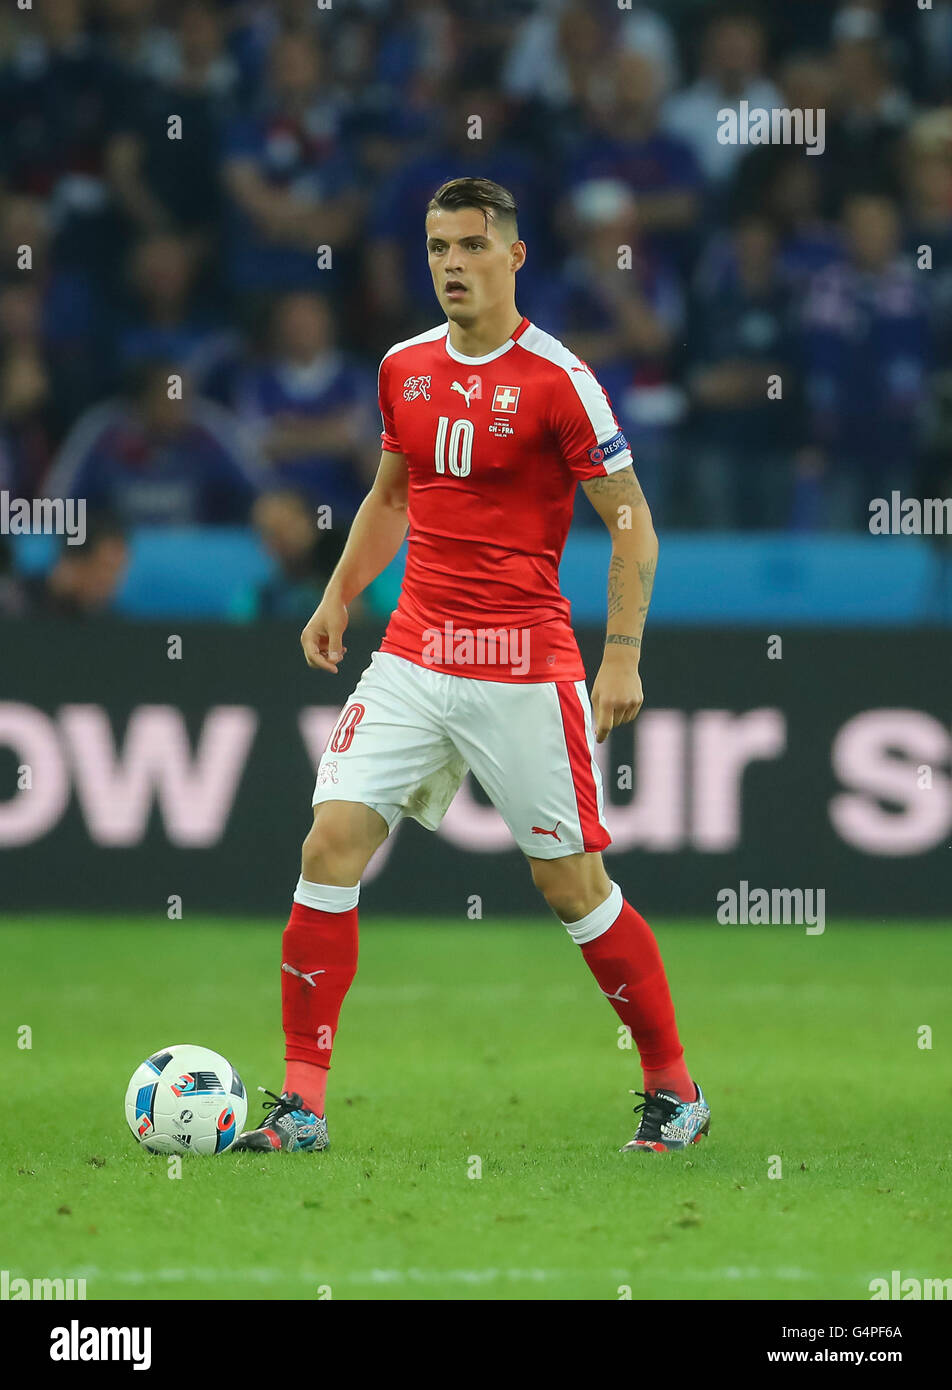 Lille, France. 19th June, 2016. Granit XHAKA, SUI 10   drives the ball, action, full-size,  FRANCE - SWITZERLAND  0-0 Group A ,Football European Championships EURO at  June 19, 2016 in Lille, France. Fussball, Nationalteam, Frankreich, Schweiz  Credit:  Peter Schatz / Alamy Live News Stock Photo